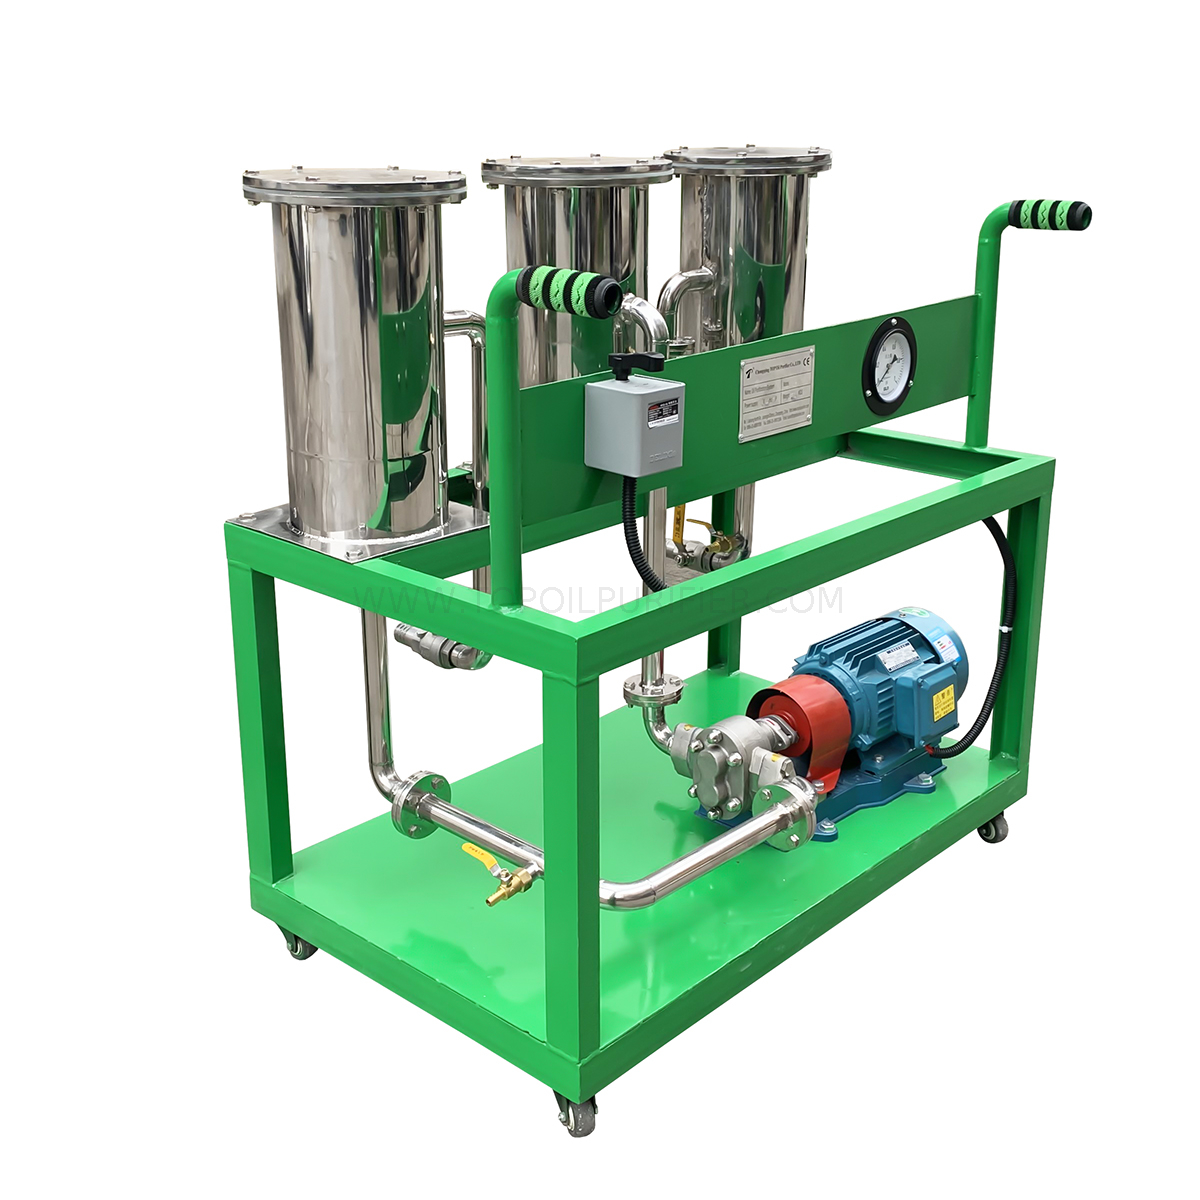 JL-S Portable Stainless Steel Oil Filter Machine